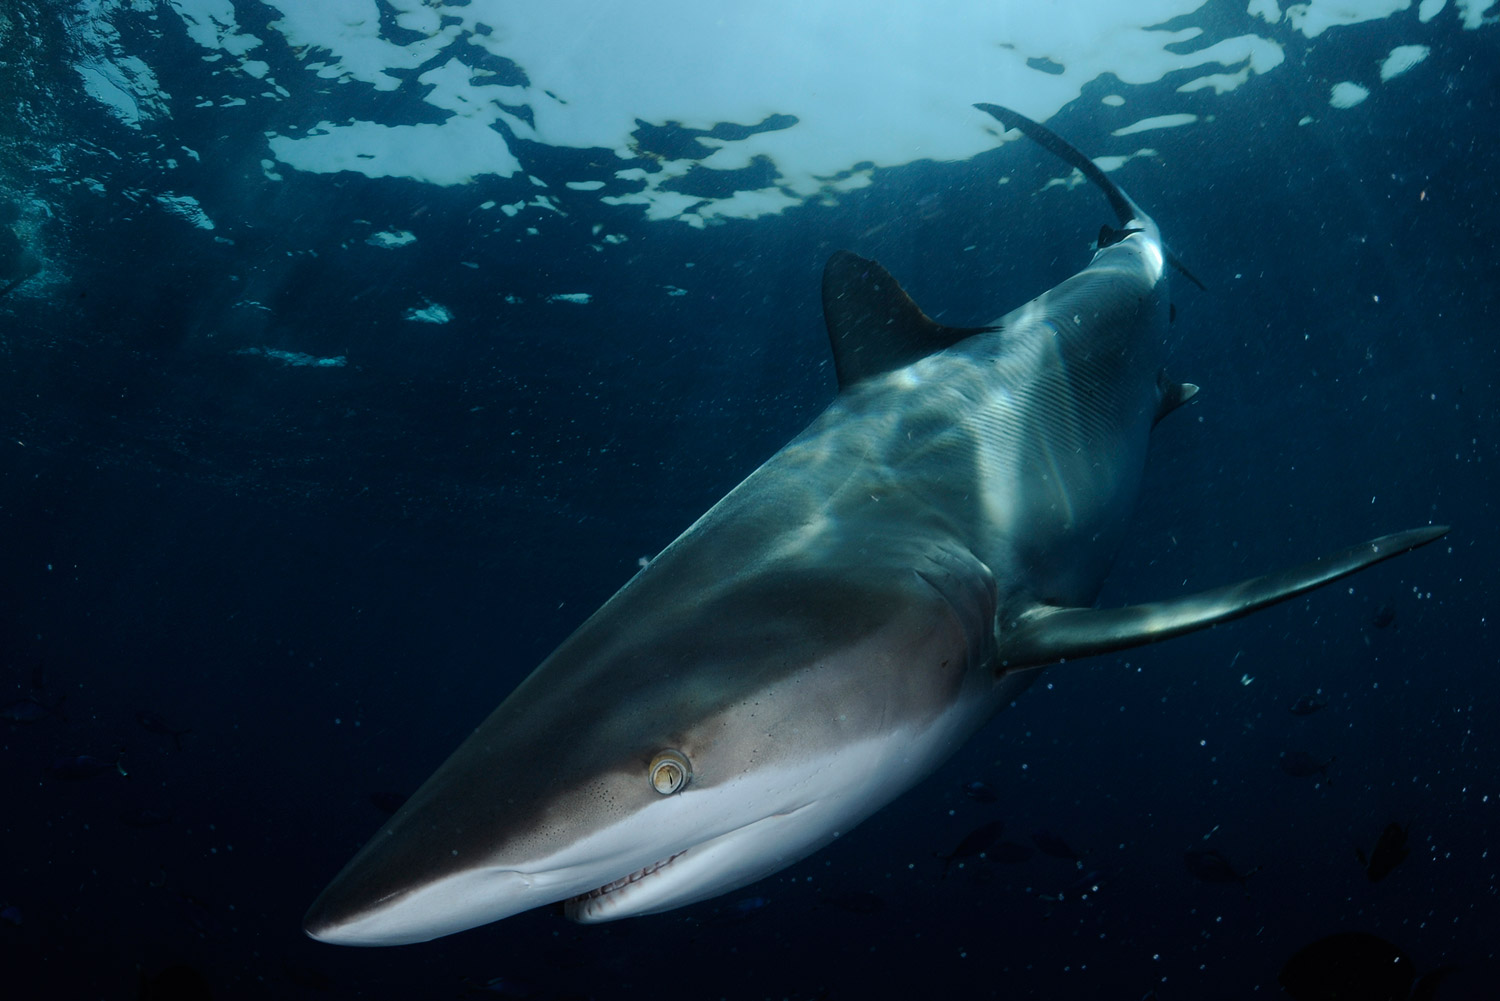 Large Red sea silky sharks are bold and dominate the water column.